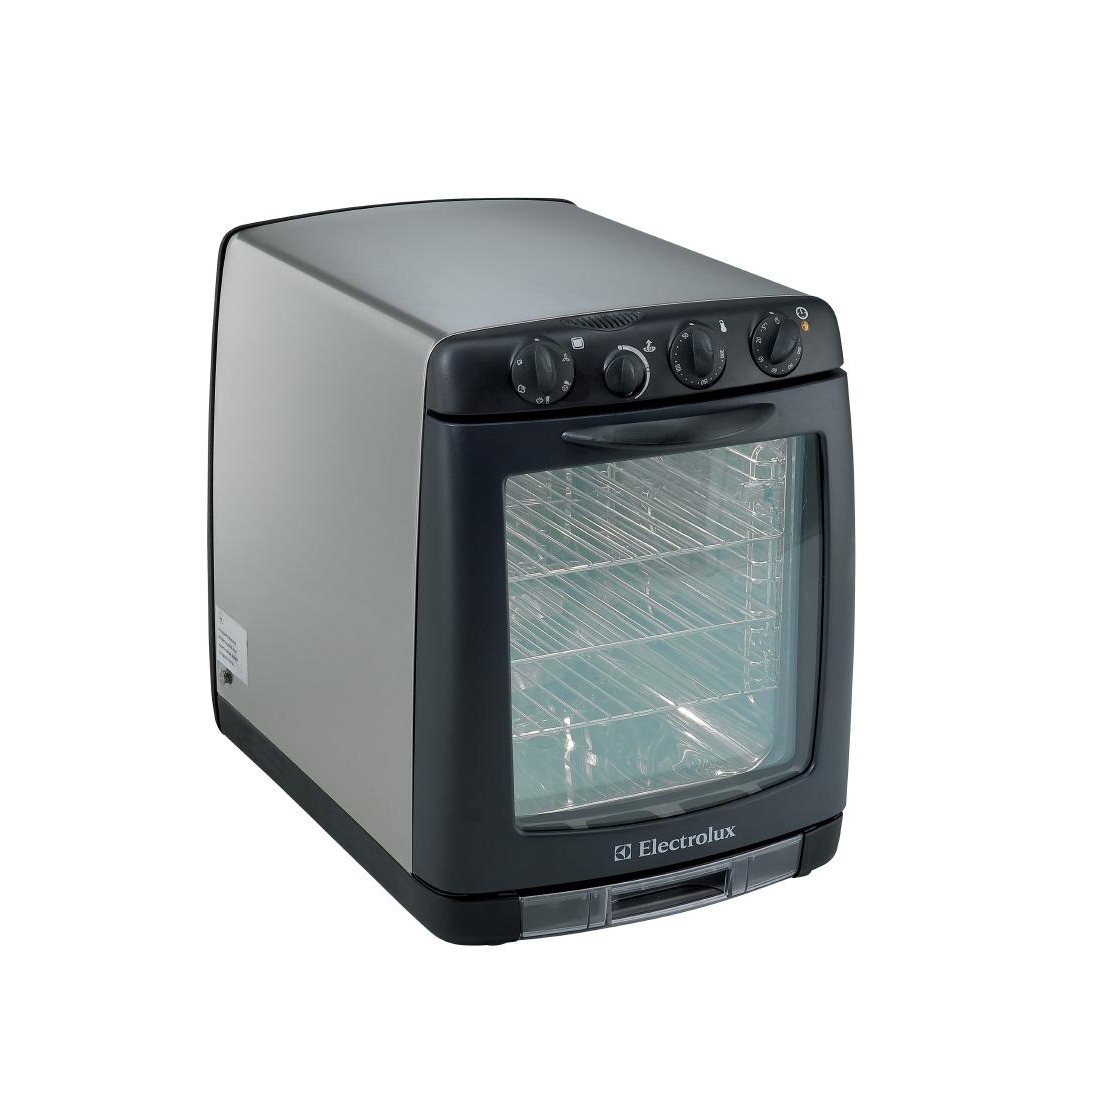 Electrolux Mini Combi Oven 3 x 1/2 GN CCO30G